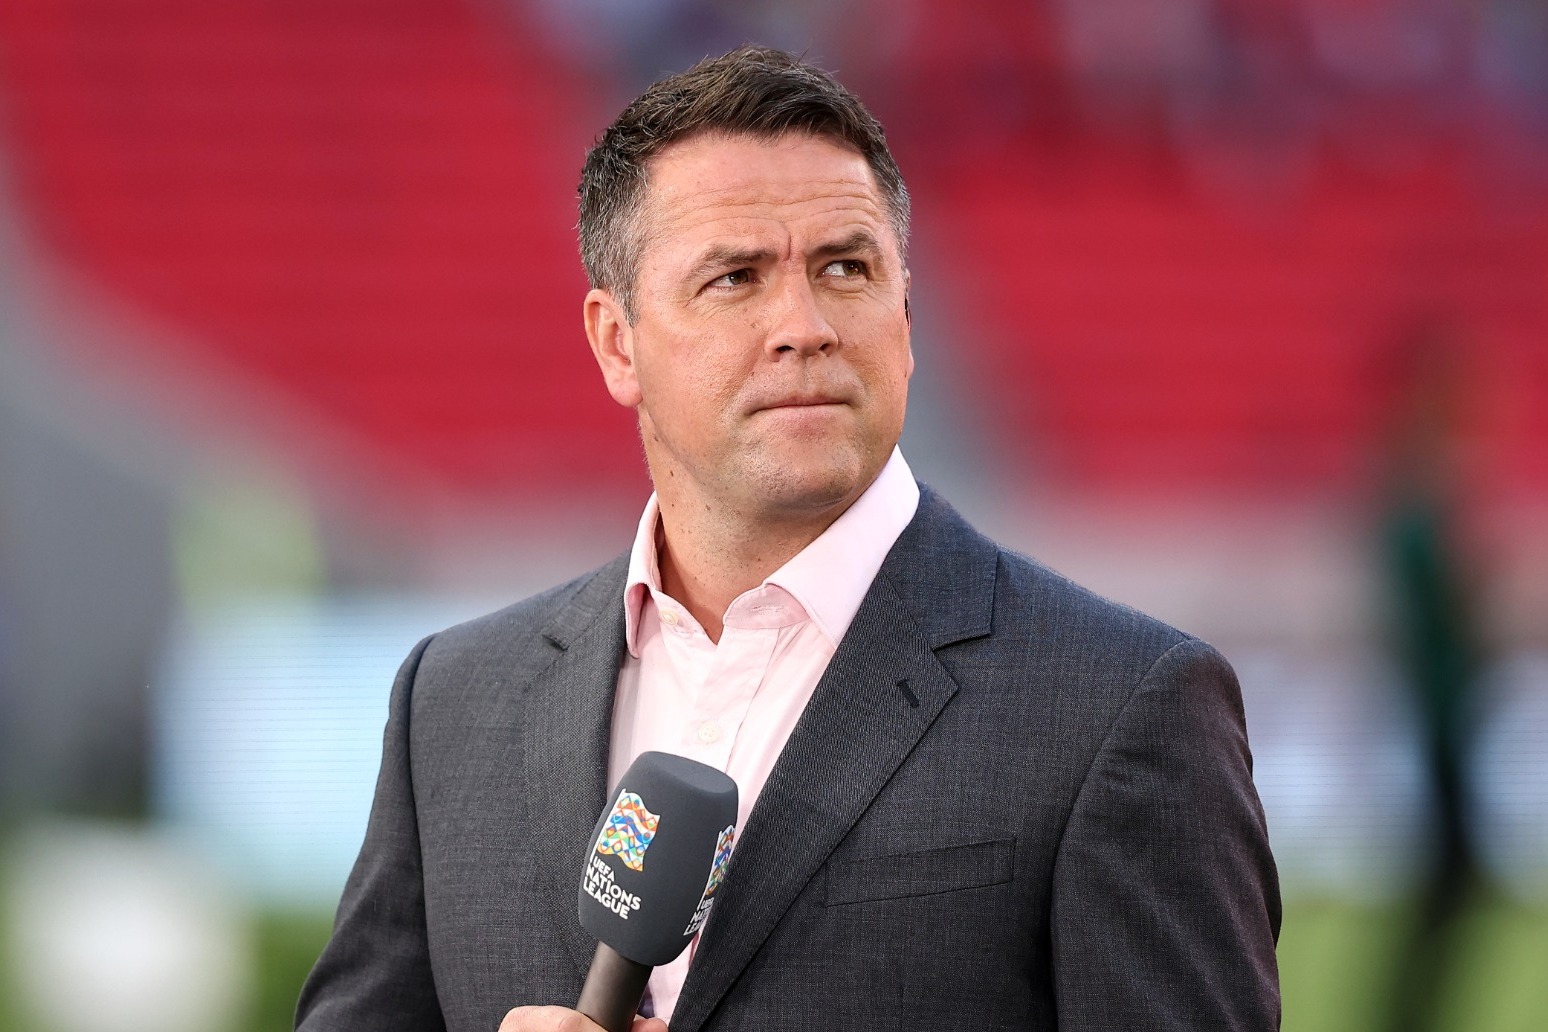 Michael Owen says daughter Gemma has ‘done us proud’ after Love Island finale 